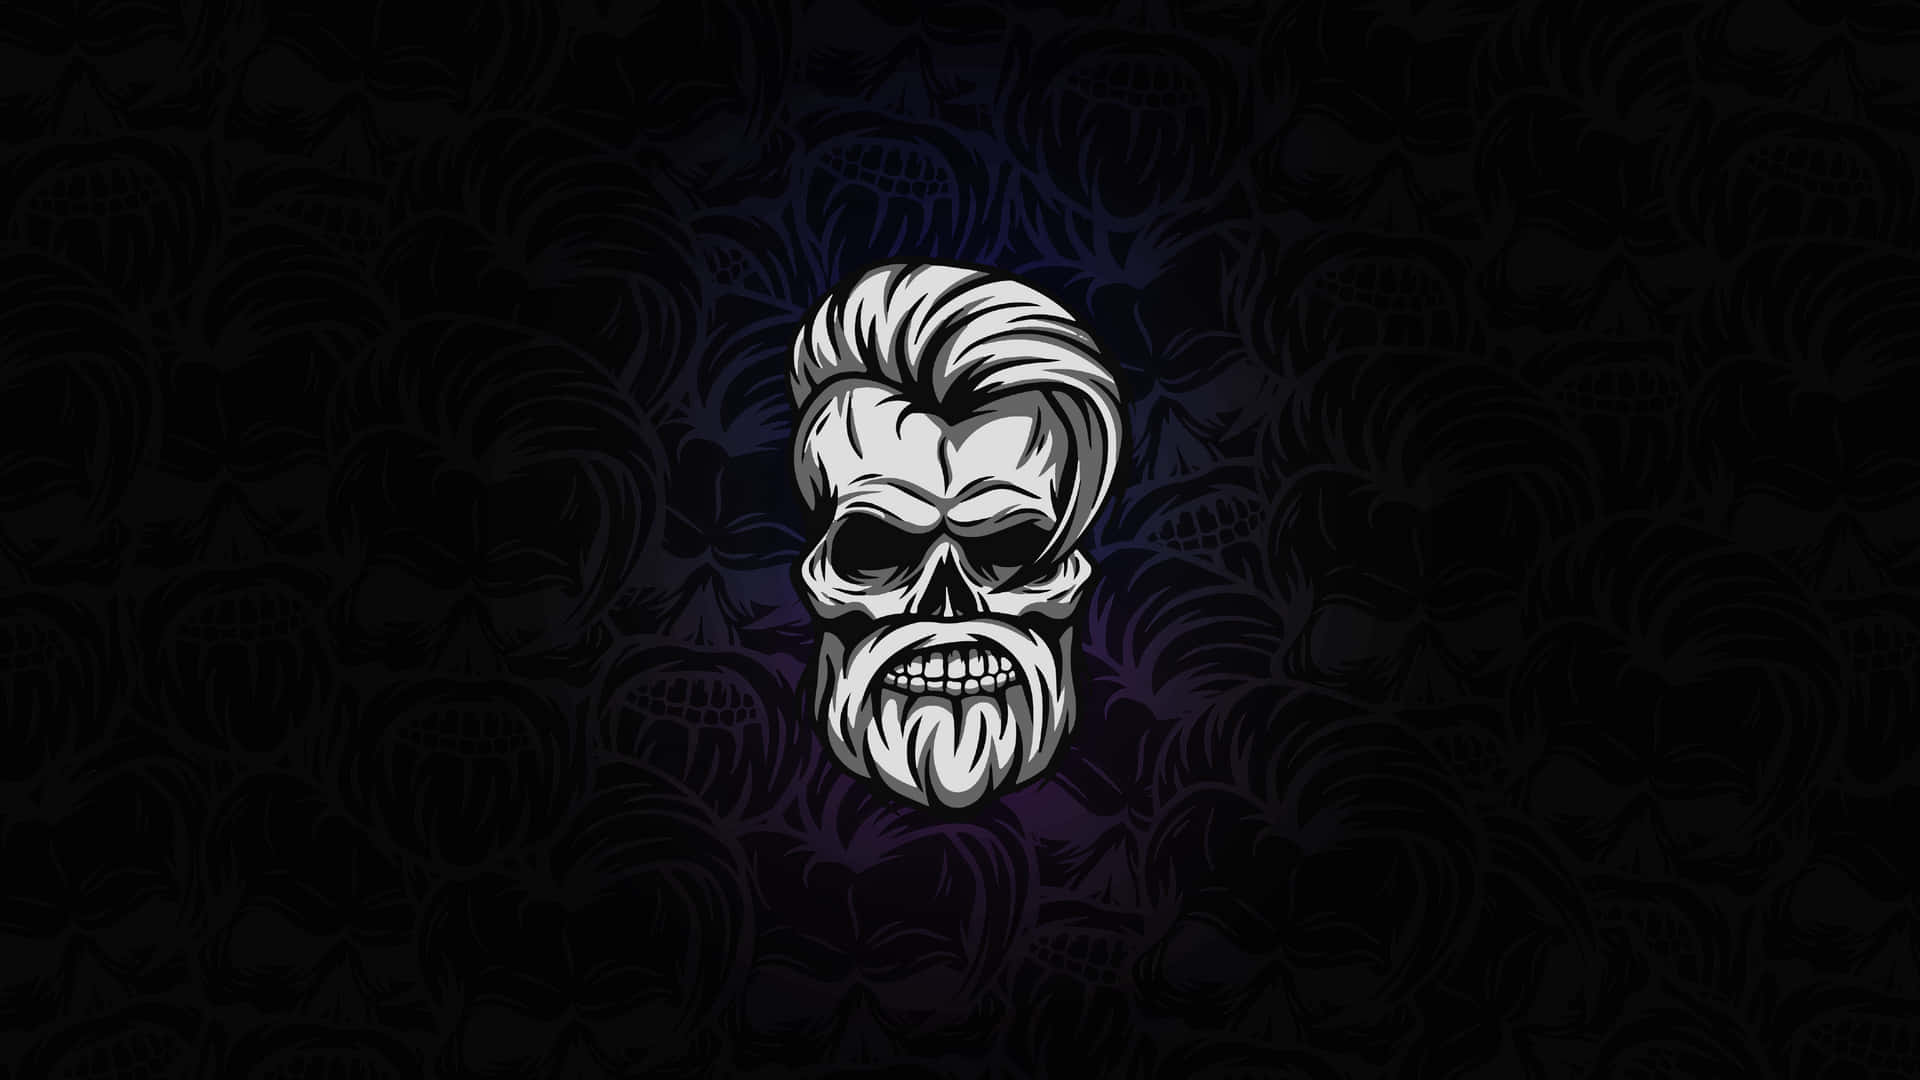 A Skull With A Beard On A Dark Background Wallpaper